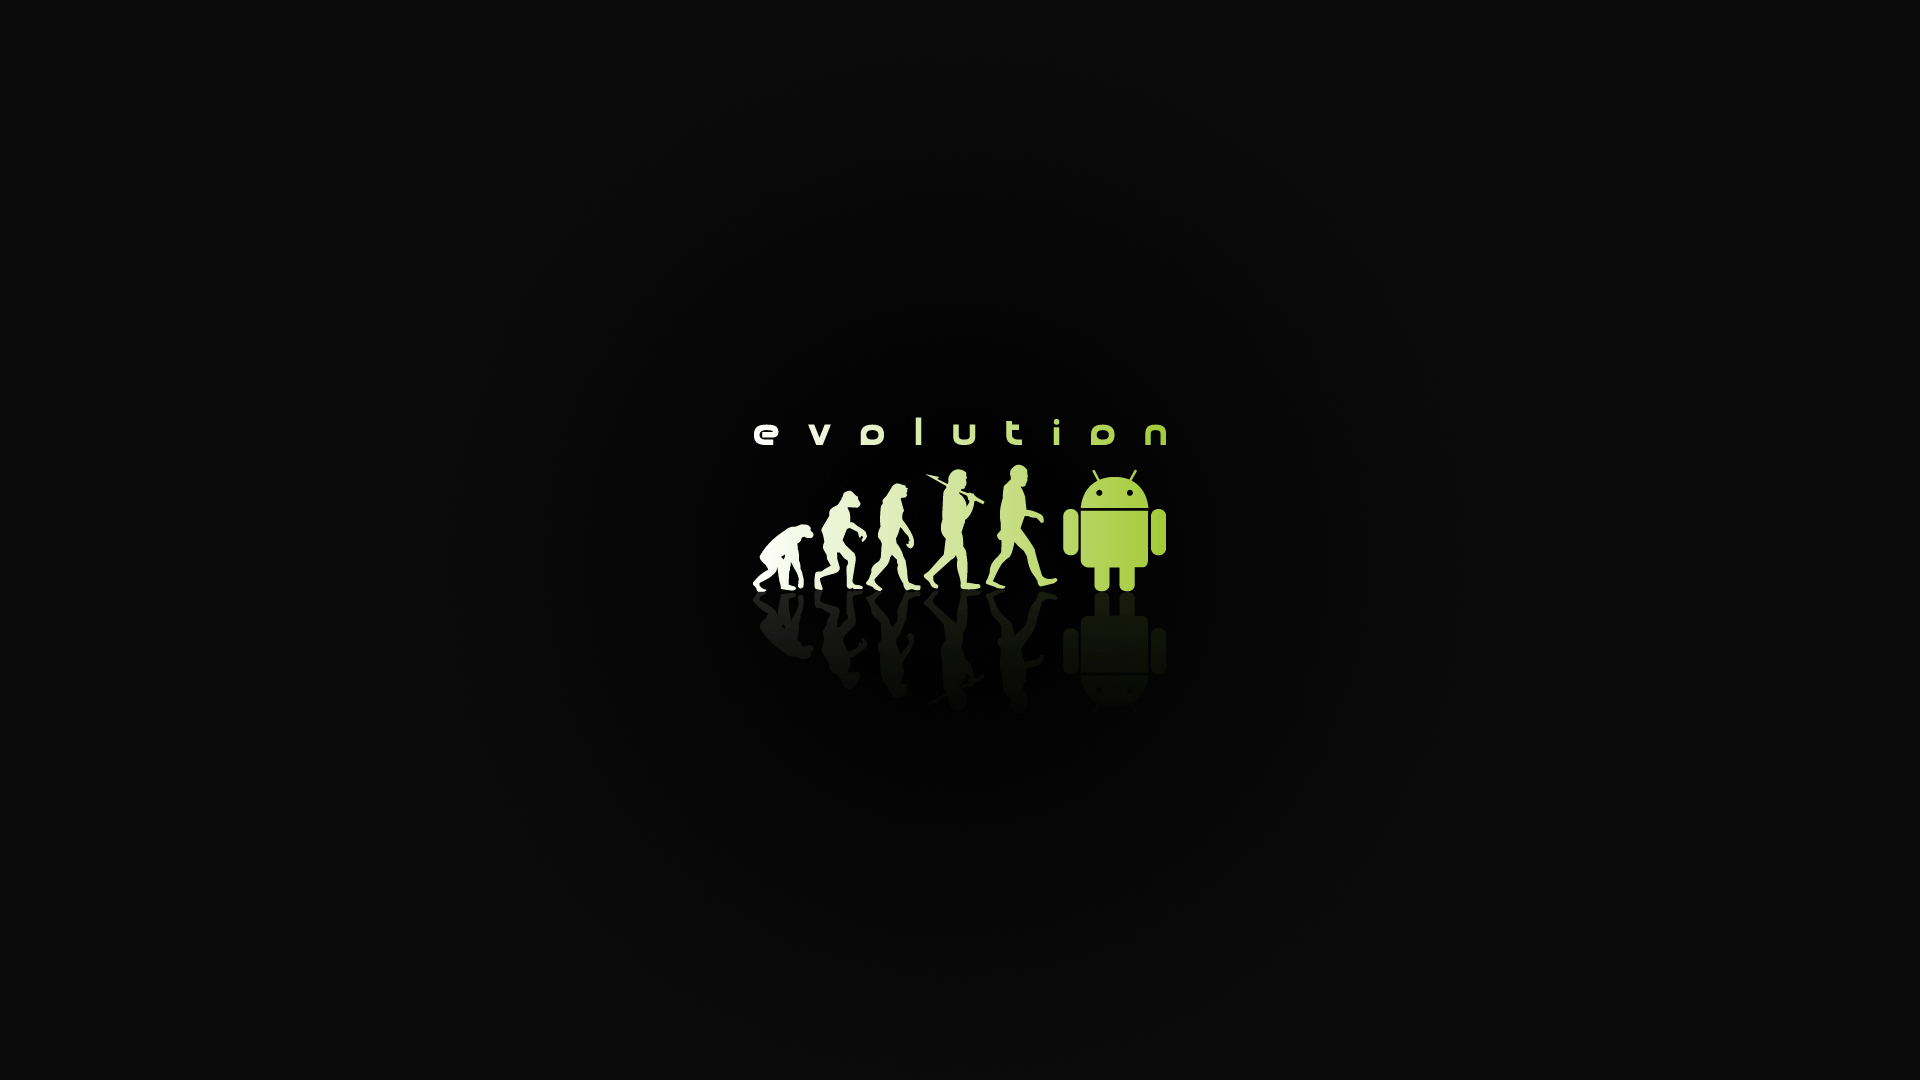 Top Wallpaper: Amazing Android Image Collection